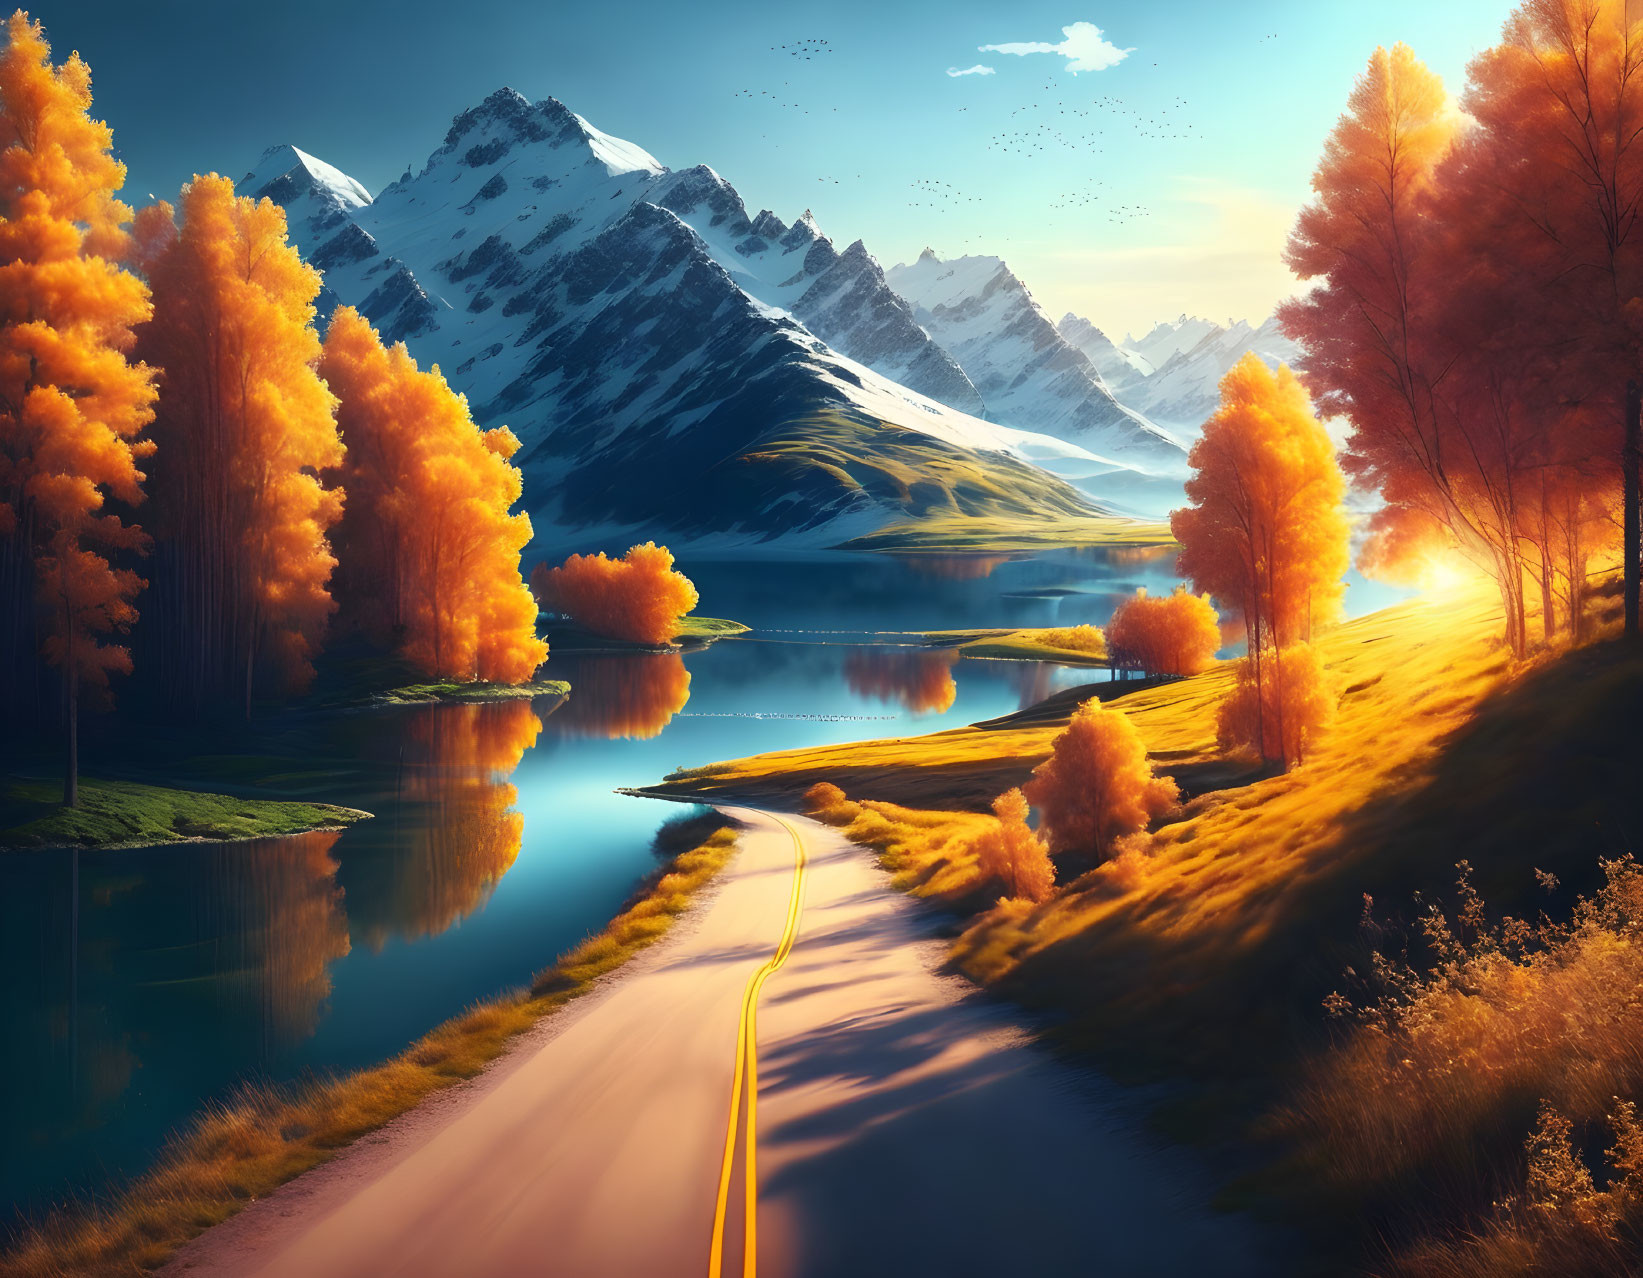 Tranquil Autumn Landscape with Lake, Trees, and Mountains